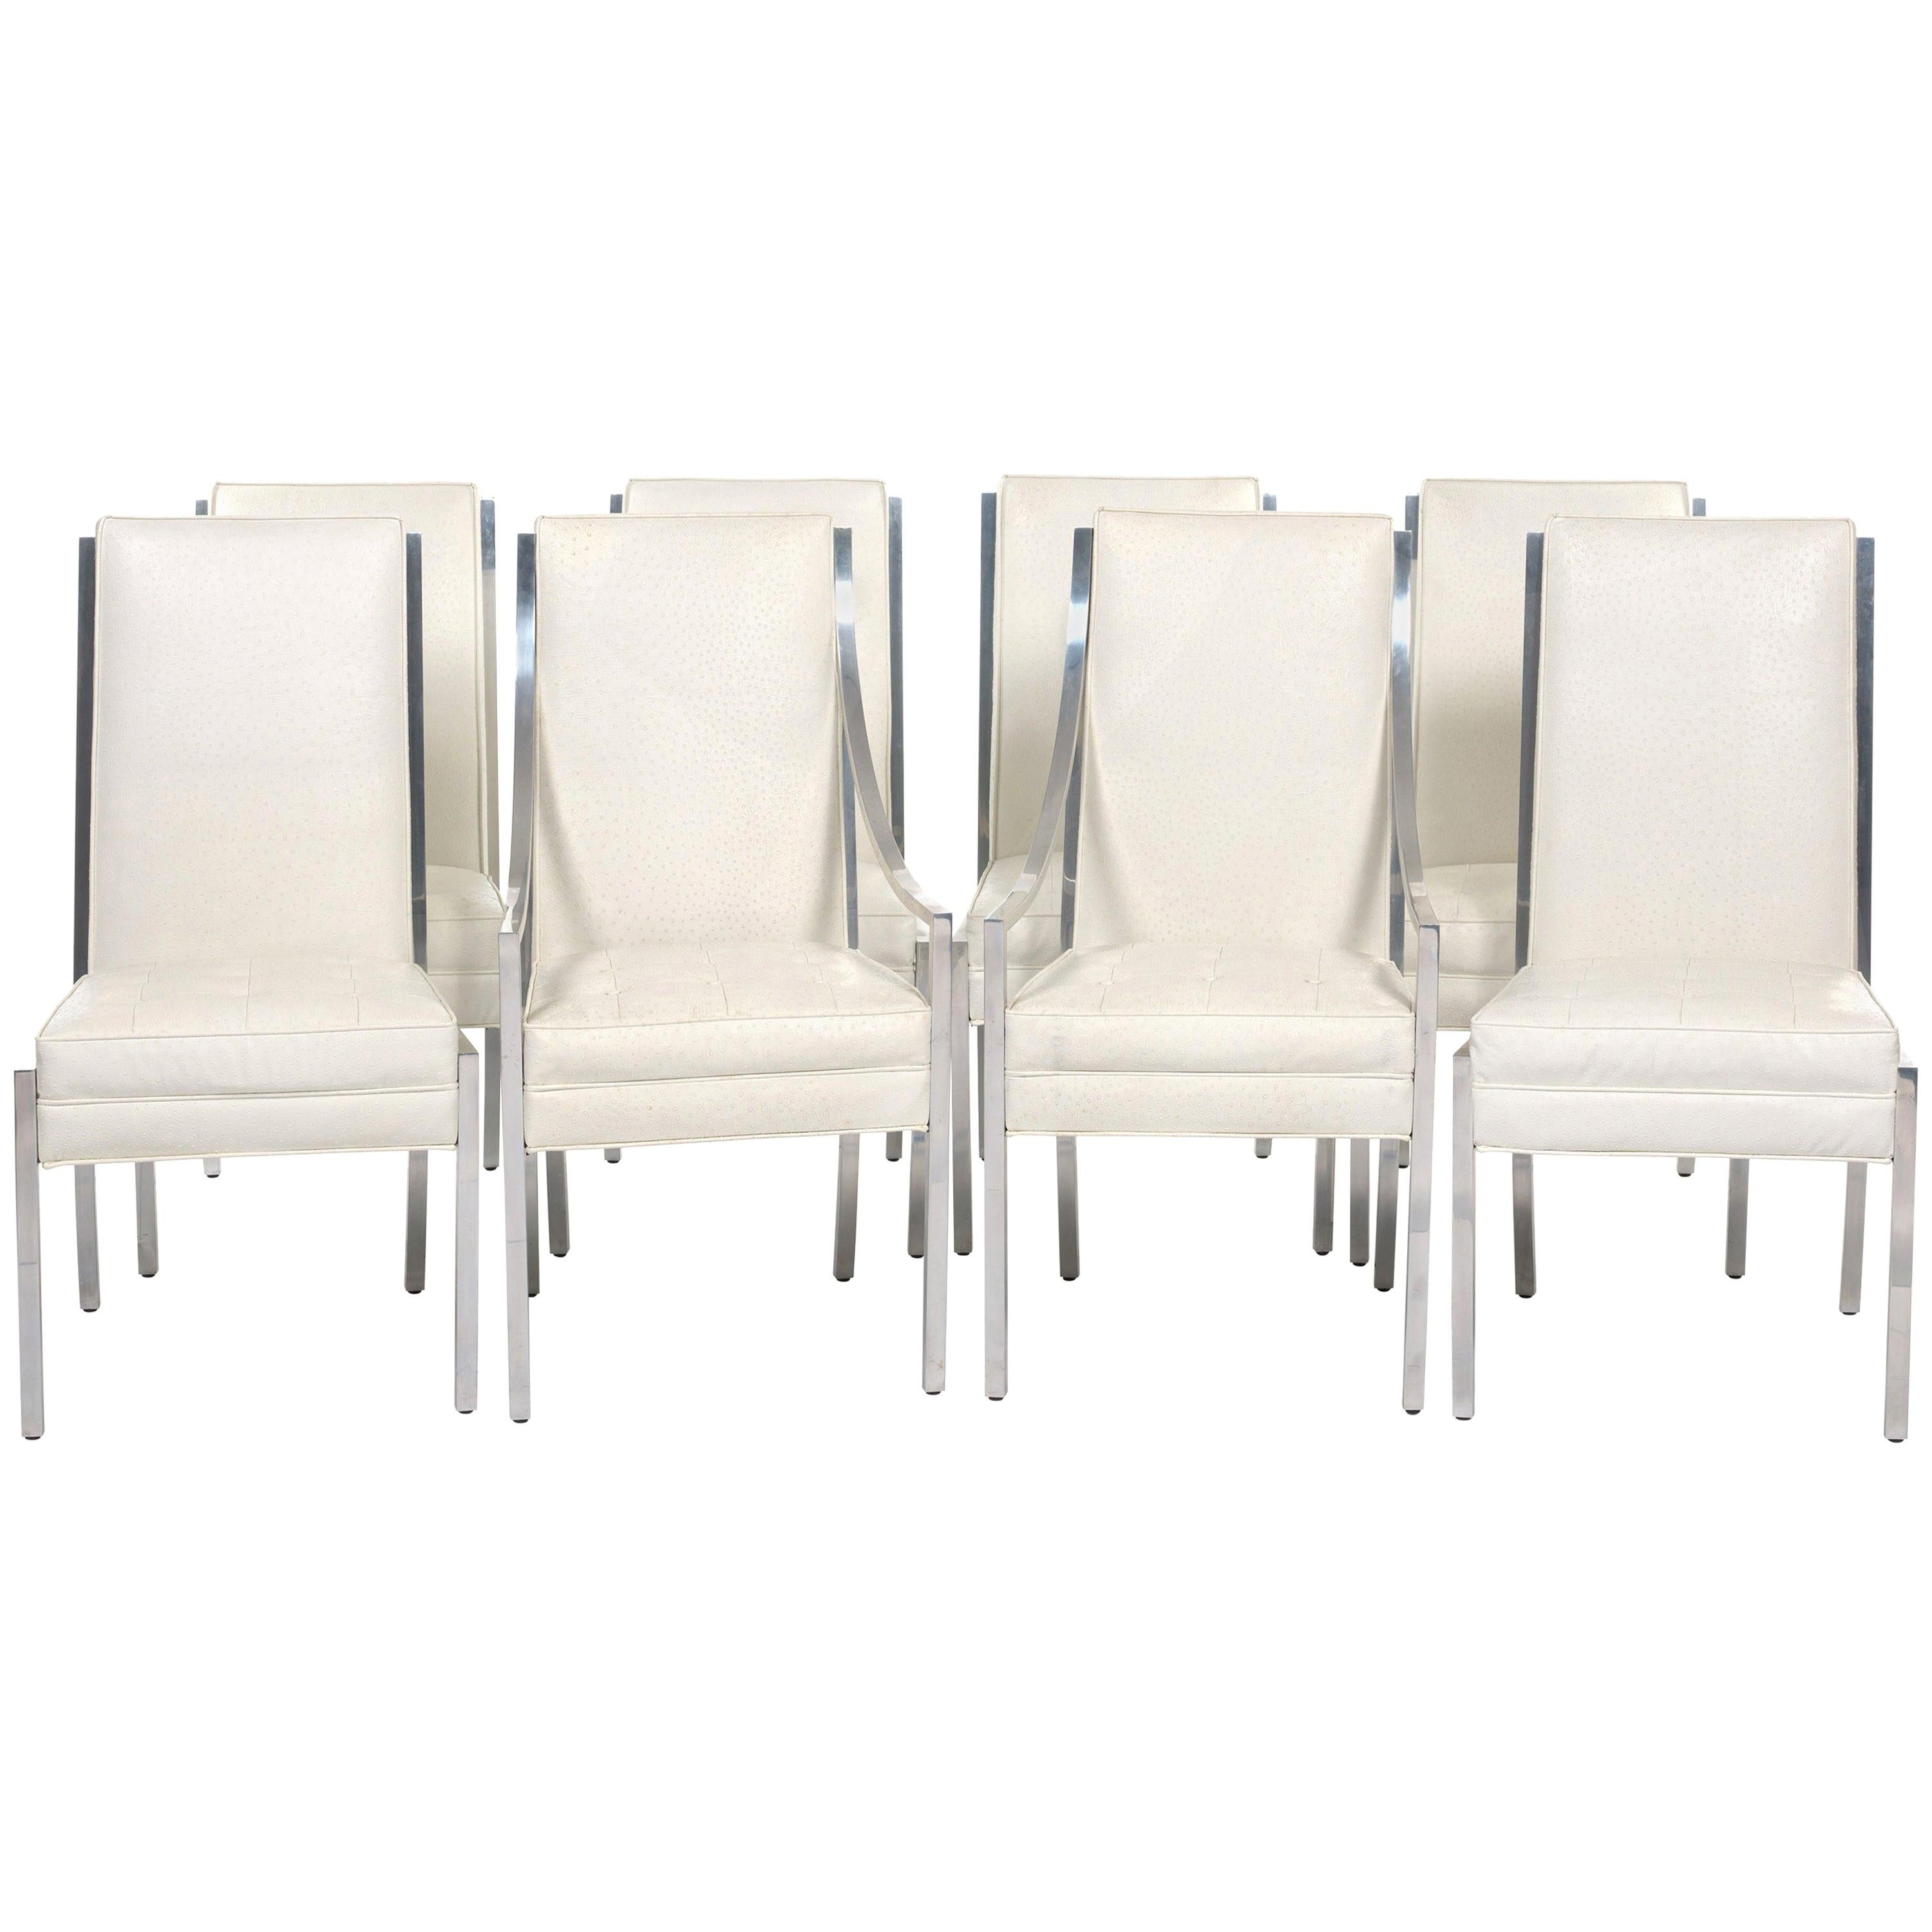 Set of Eight White Faux Ostrich Leather and Chrome Dining Chairs